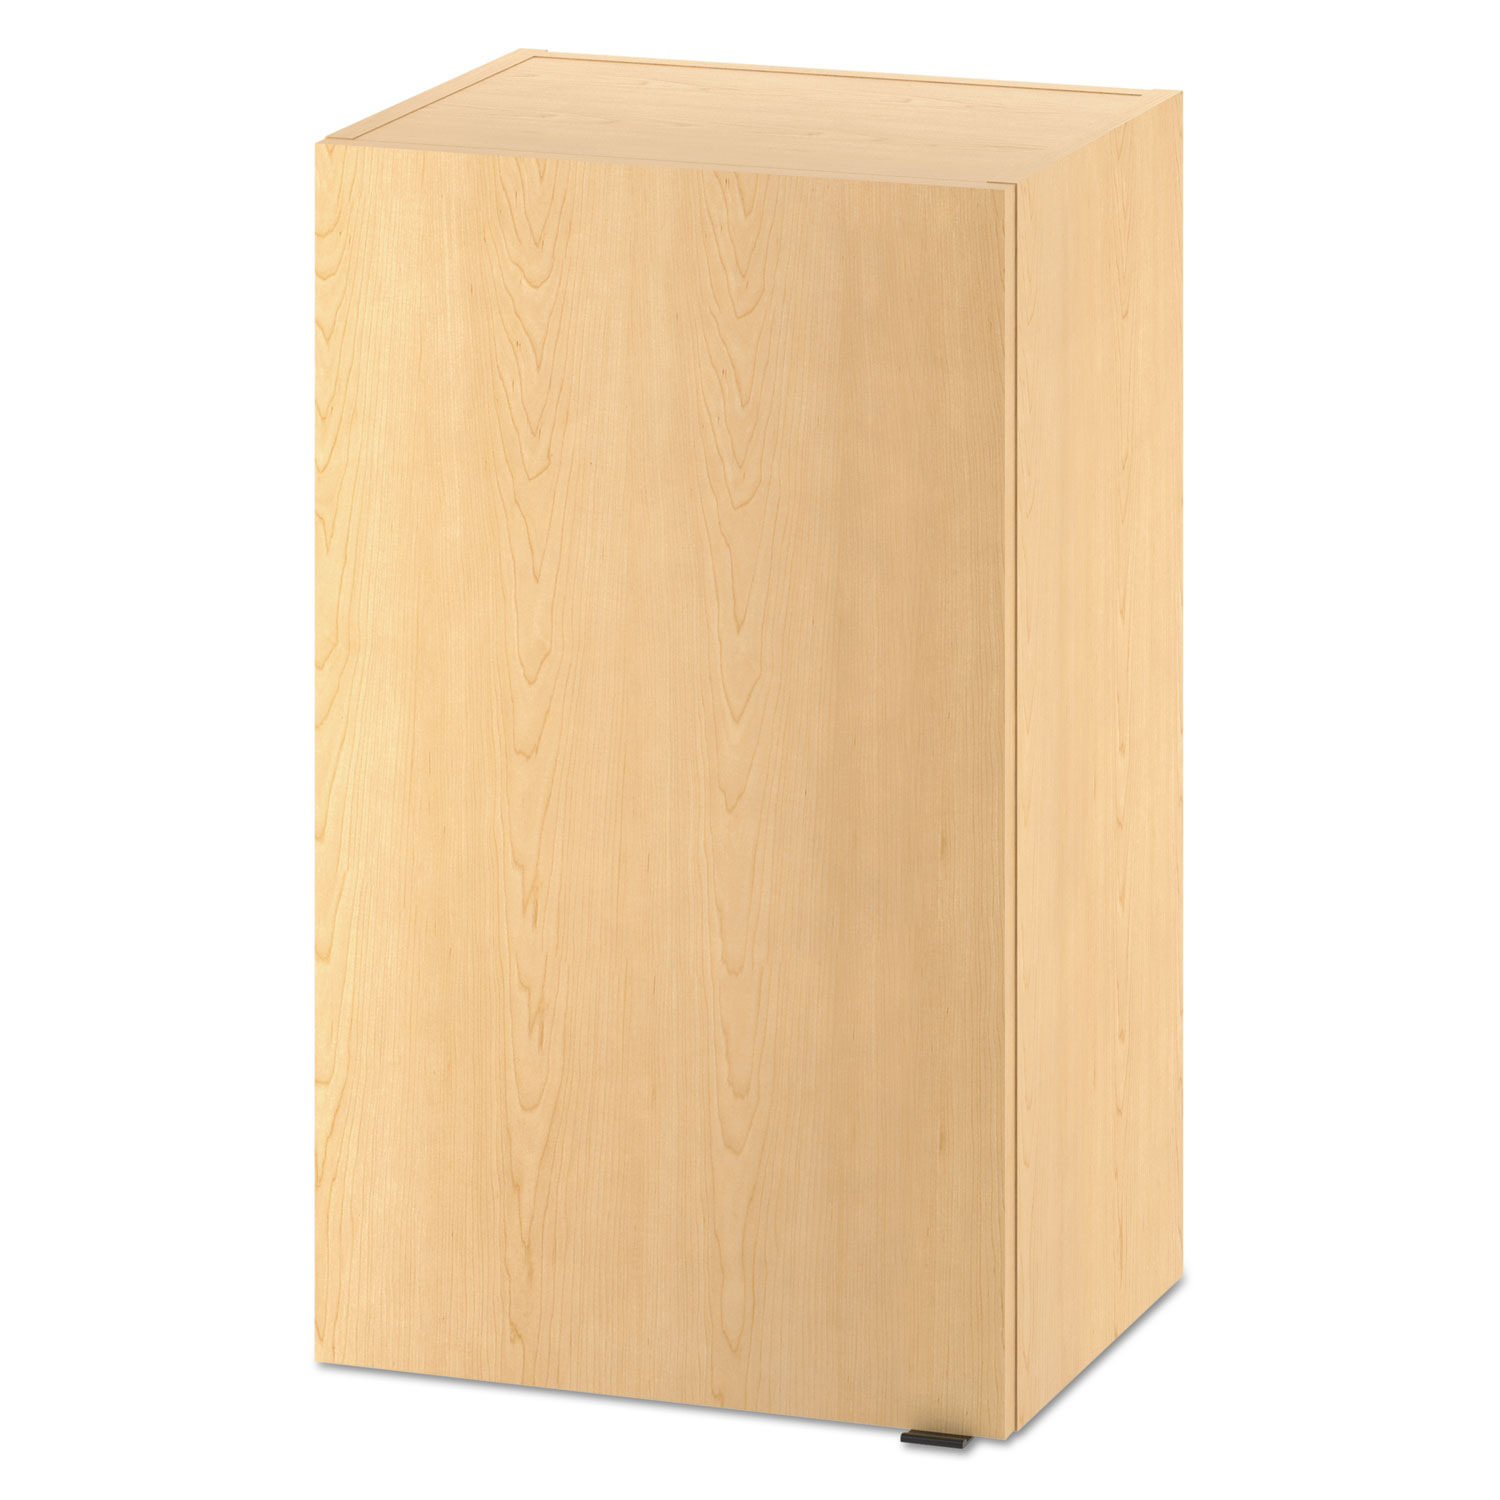 Hospitality Wall Cabinet, One Door, 18w x 14d x 30h, Natural Maple